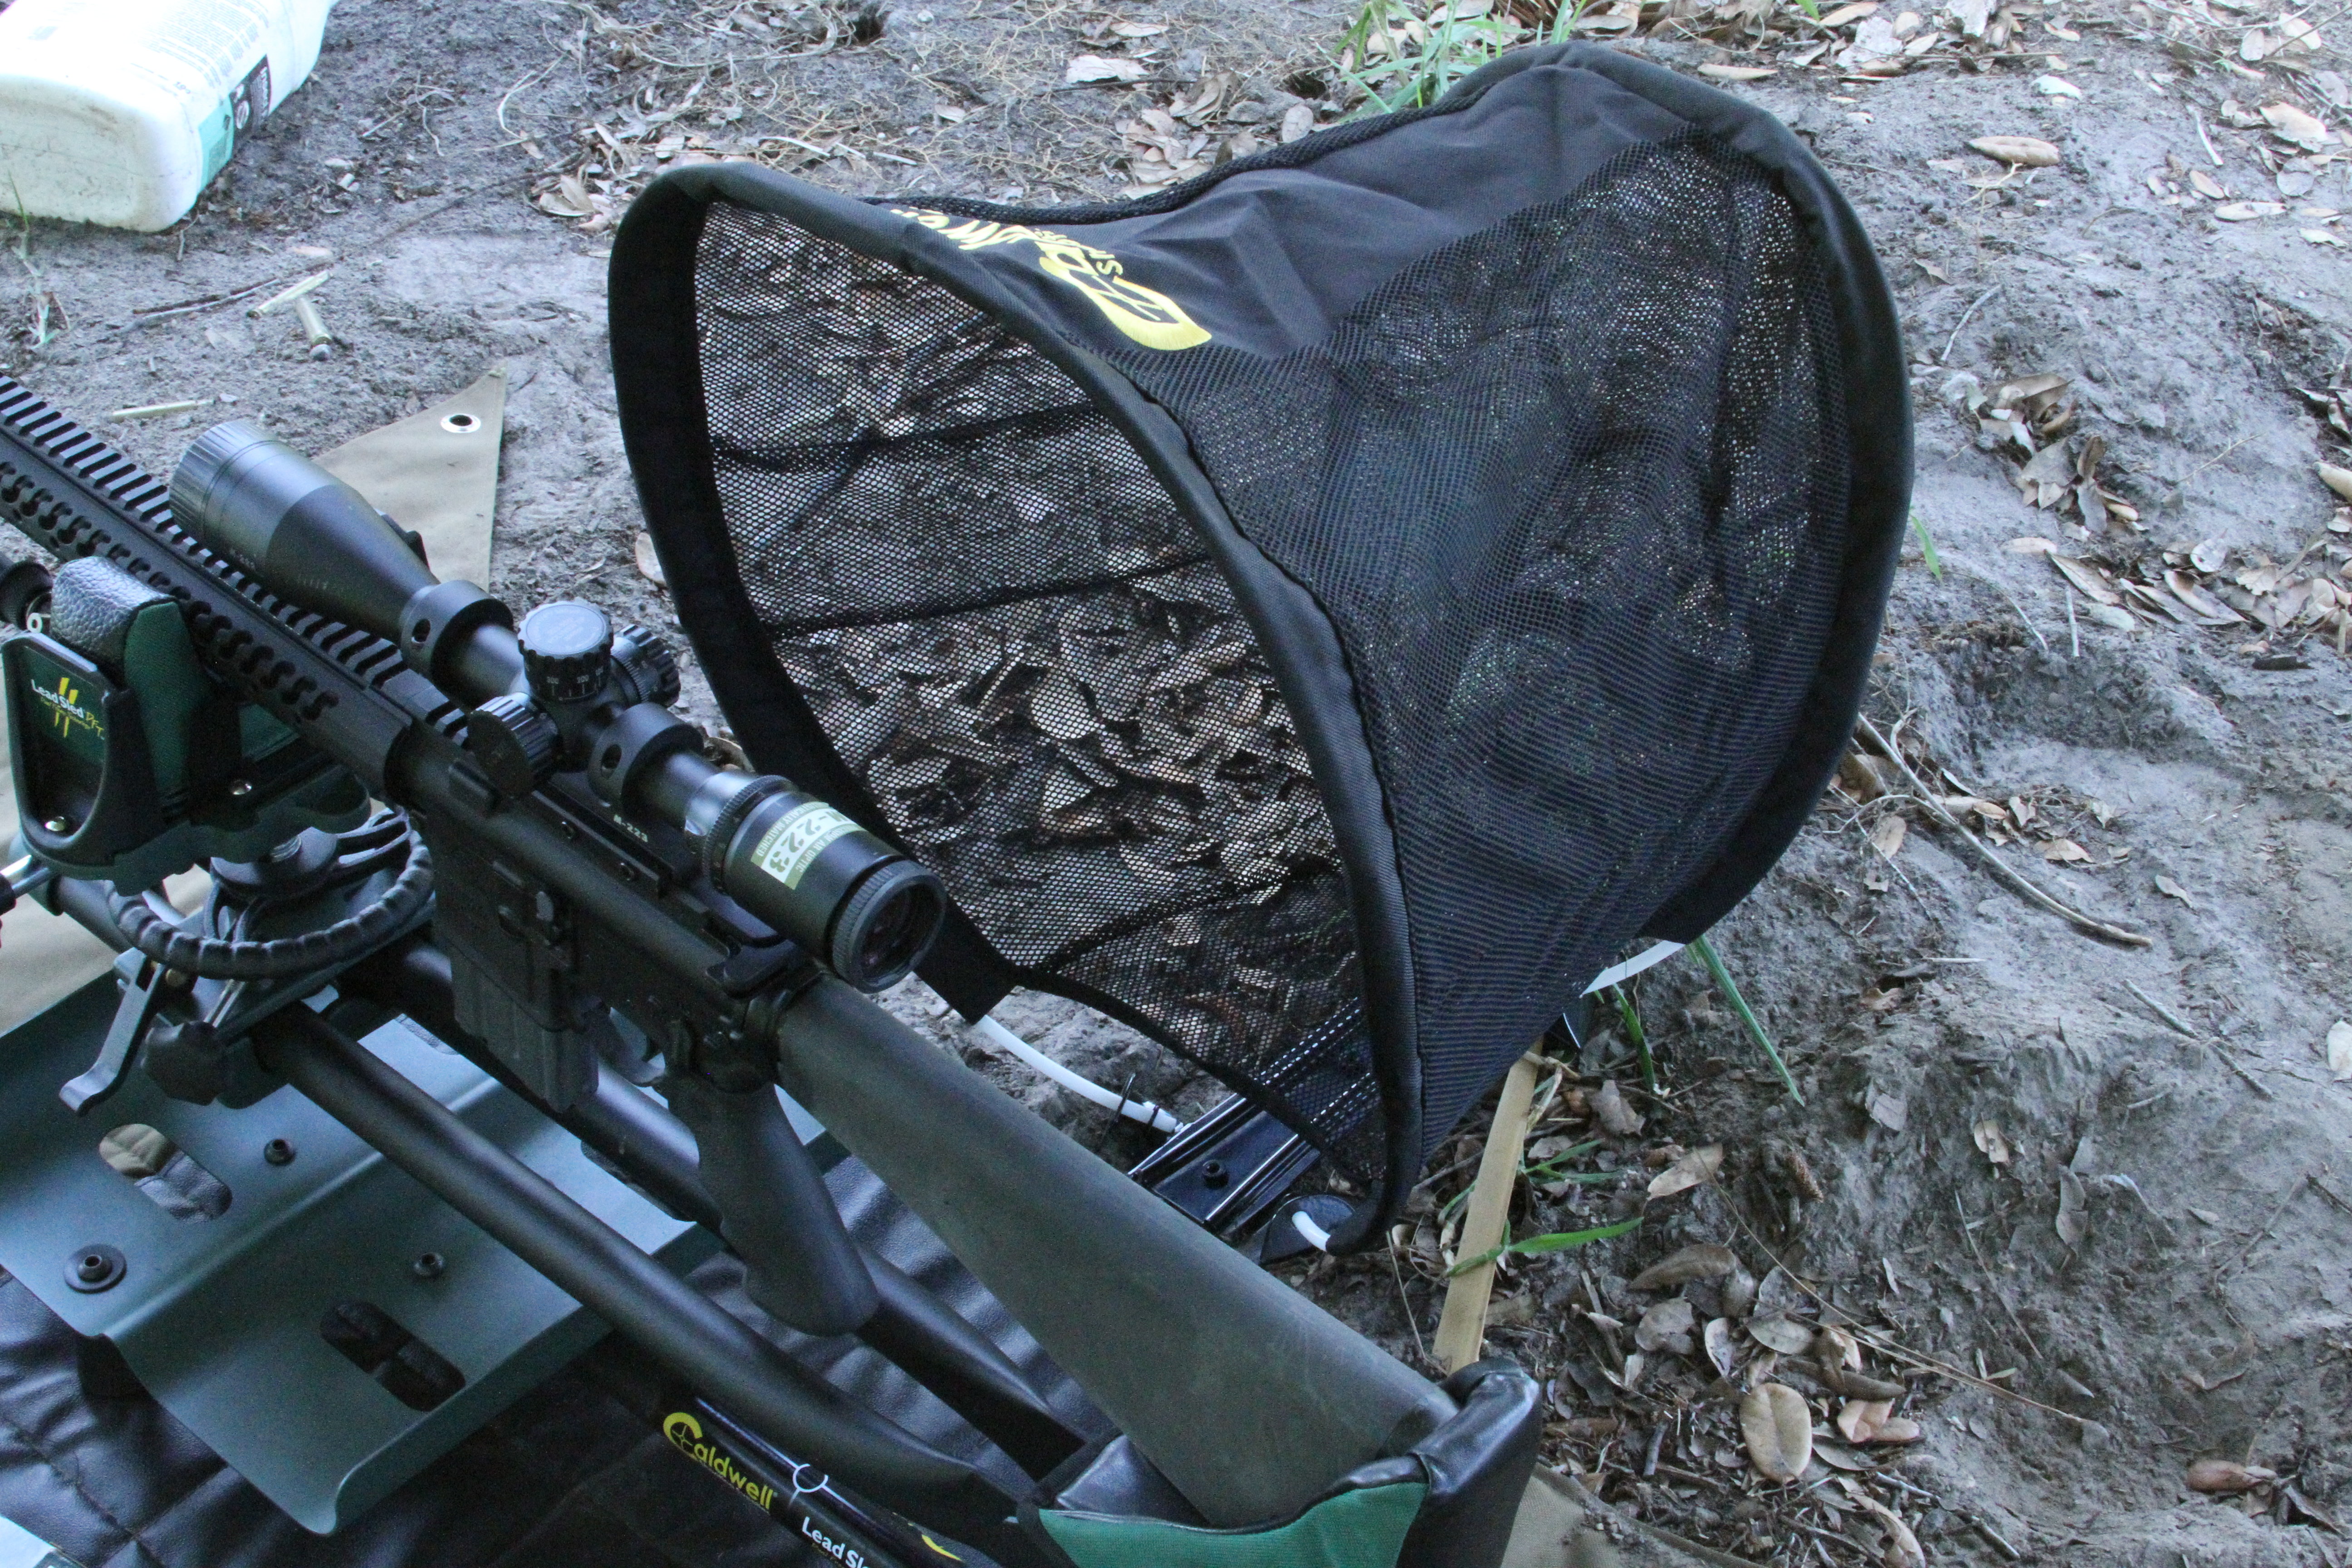 Caldwell Brass Trap - Catcher - Product Review - Save Your Brass